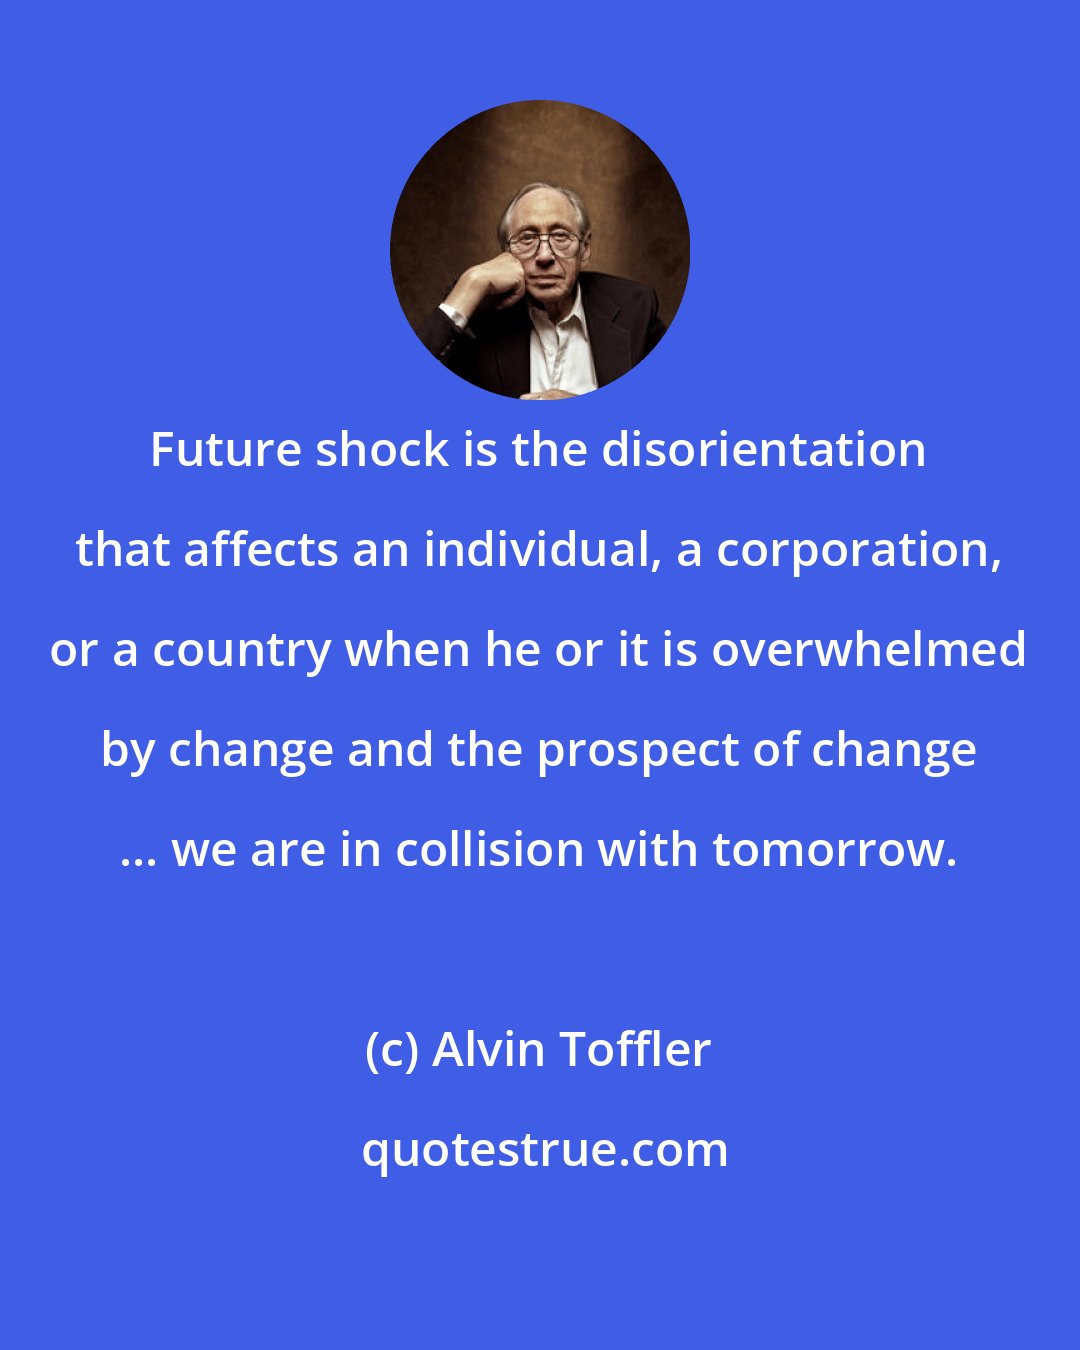 Alvin Toffler: Future shock is the disorientation that affects an individual, a corporation, or a country when he or it is overwhelmed by change and the prospect of change ... we are in collision with tomorrow.